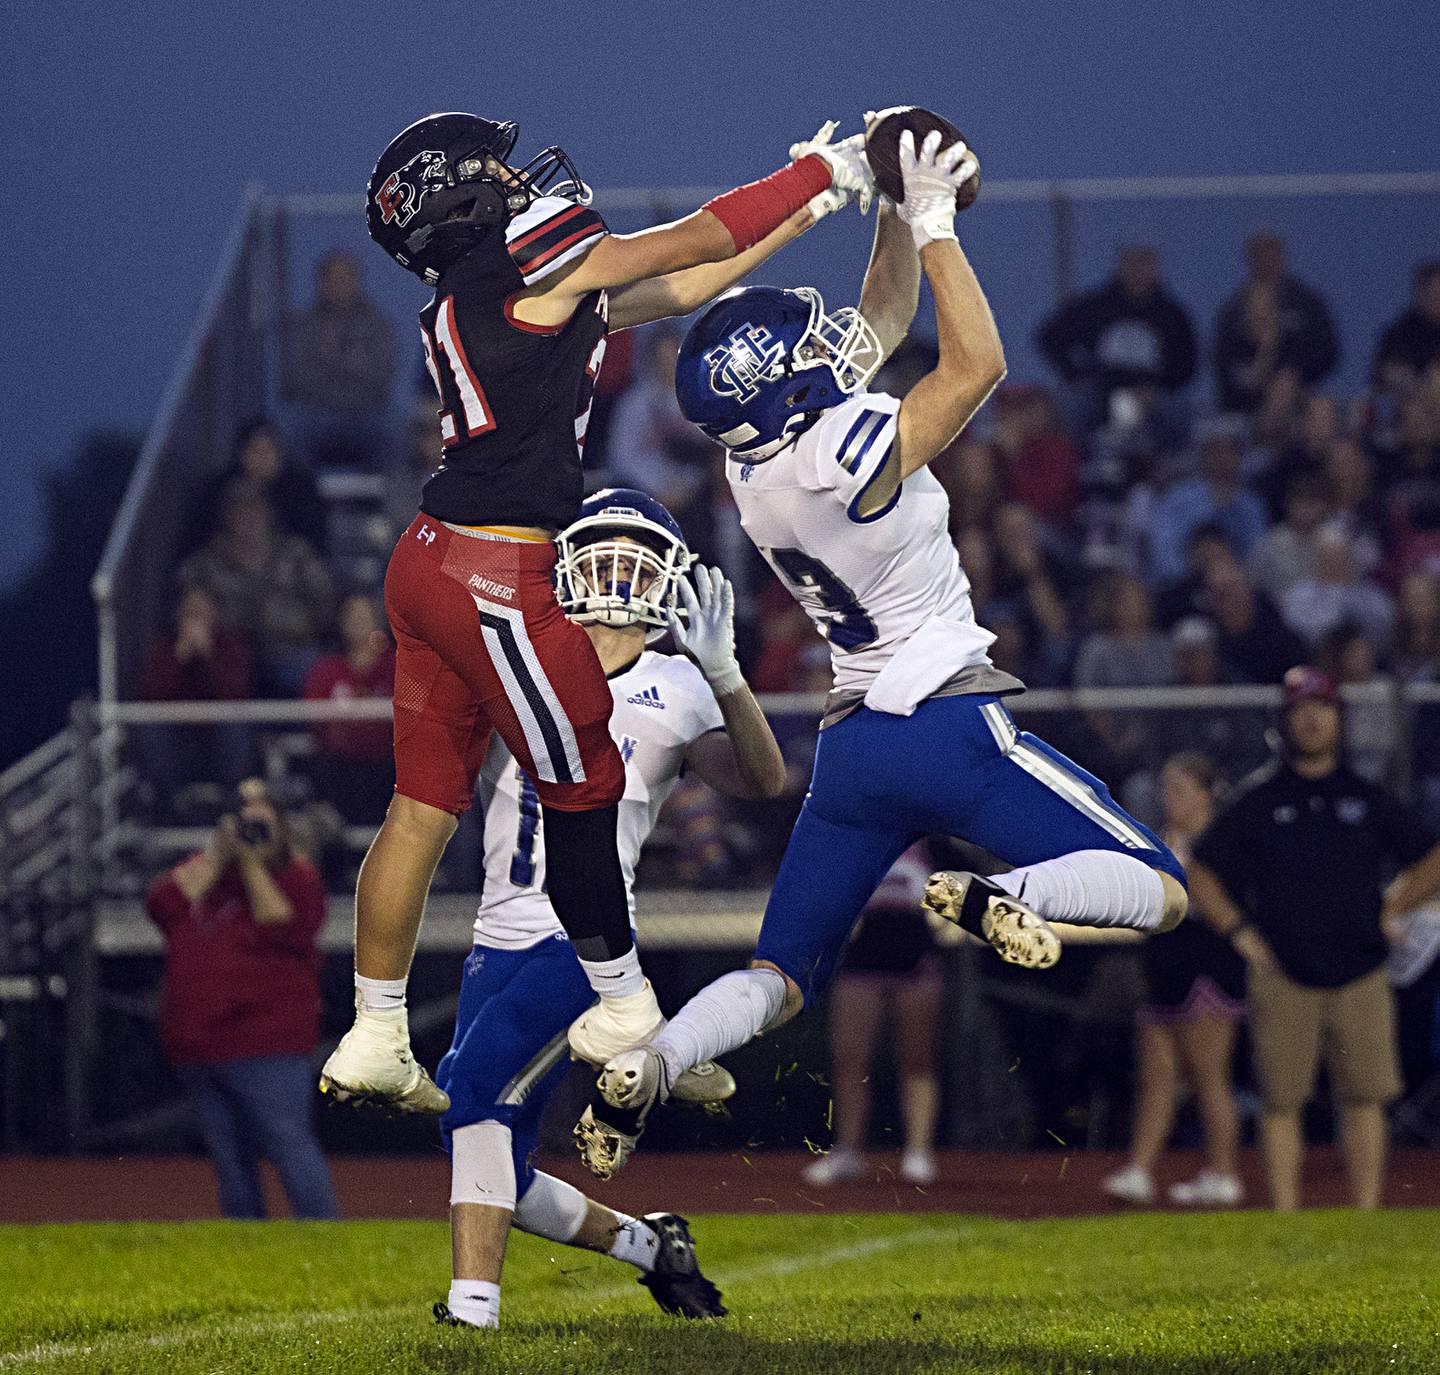 Newman’s Mac Hanrahan hauls in an interception in front of Erie-Prophetstown’s Parker Rangel Friday, Sept. 22, 2023 in a game at Erie.